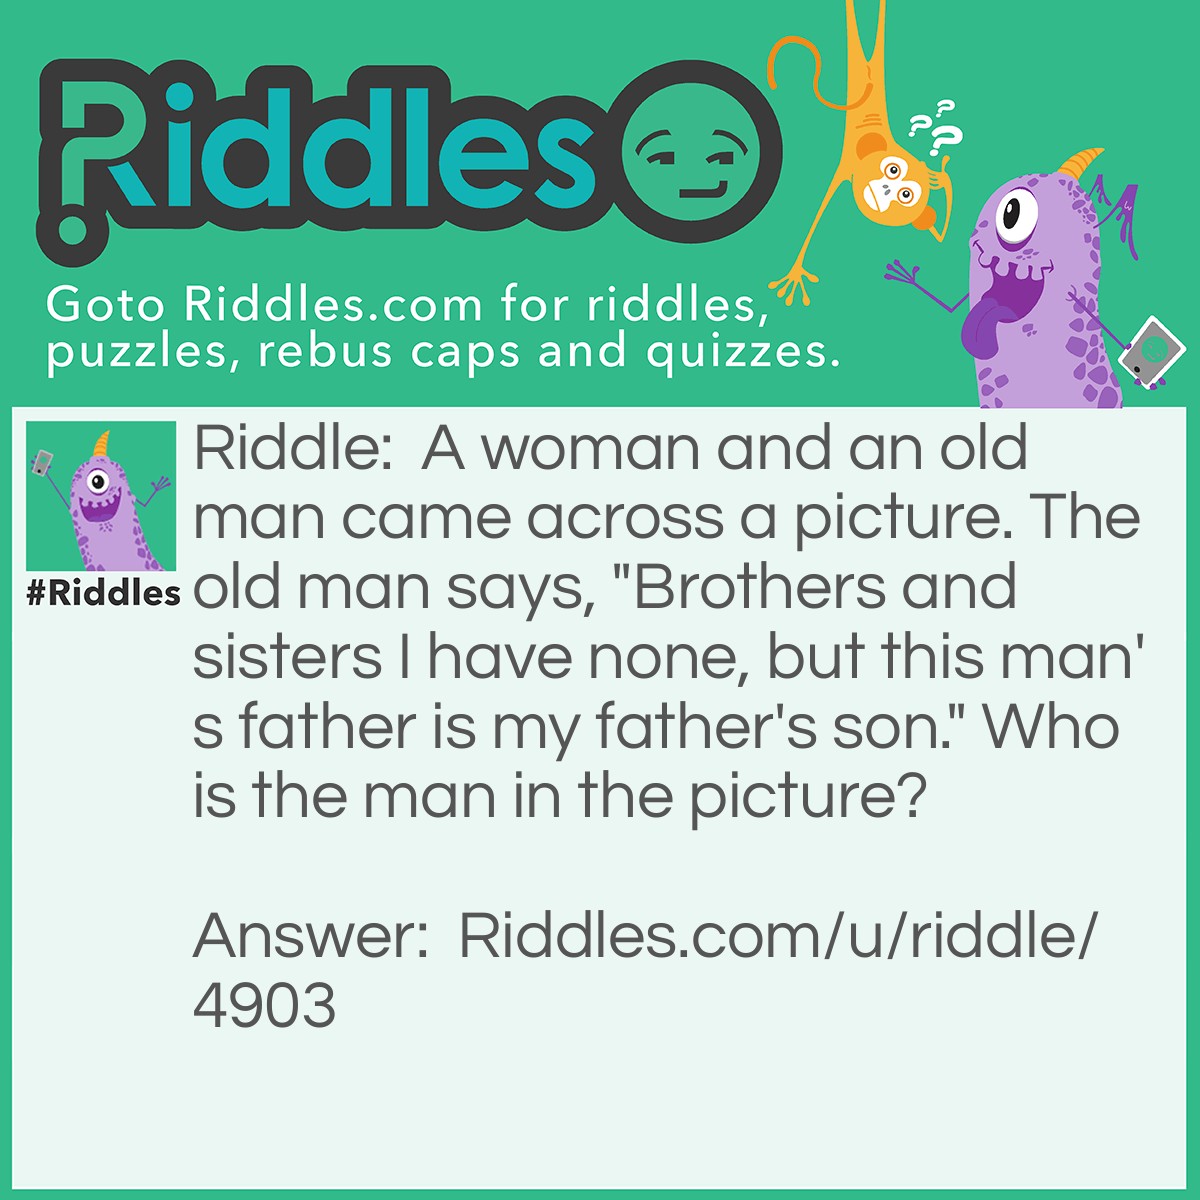 Riddle: A woman and an old man came across a picture. The old man says, "Brothers and sisters I have none, but this man's father is my father's son." Who is the man in the picture? Answer: The old man's son.